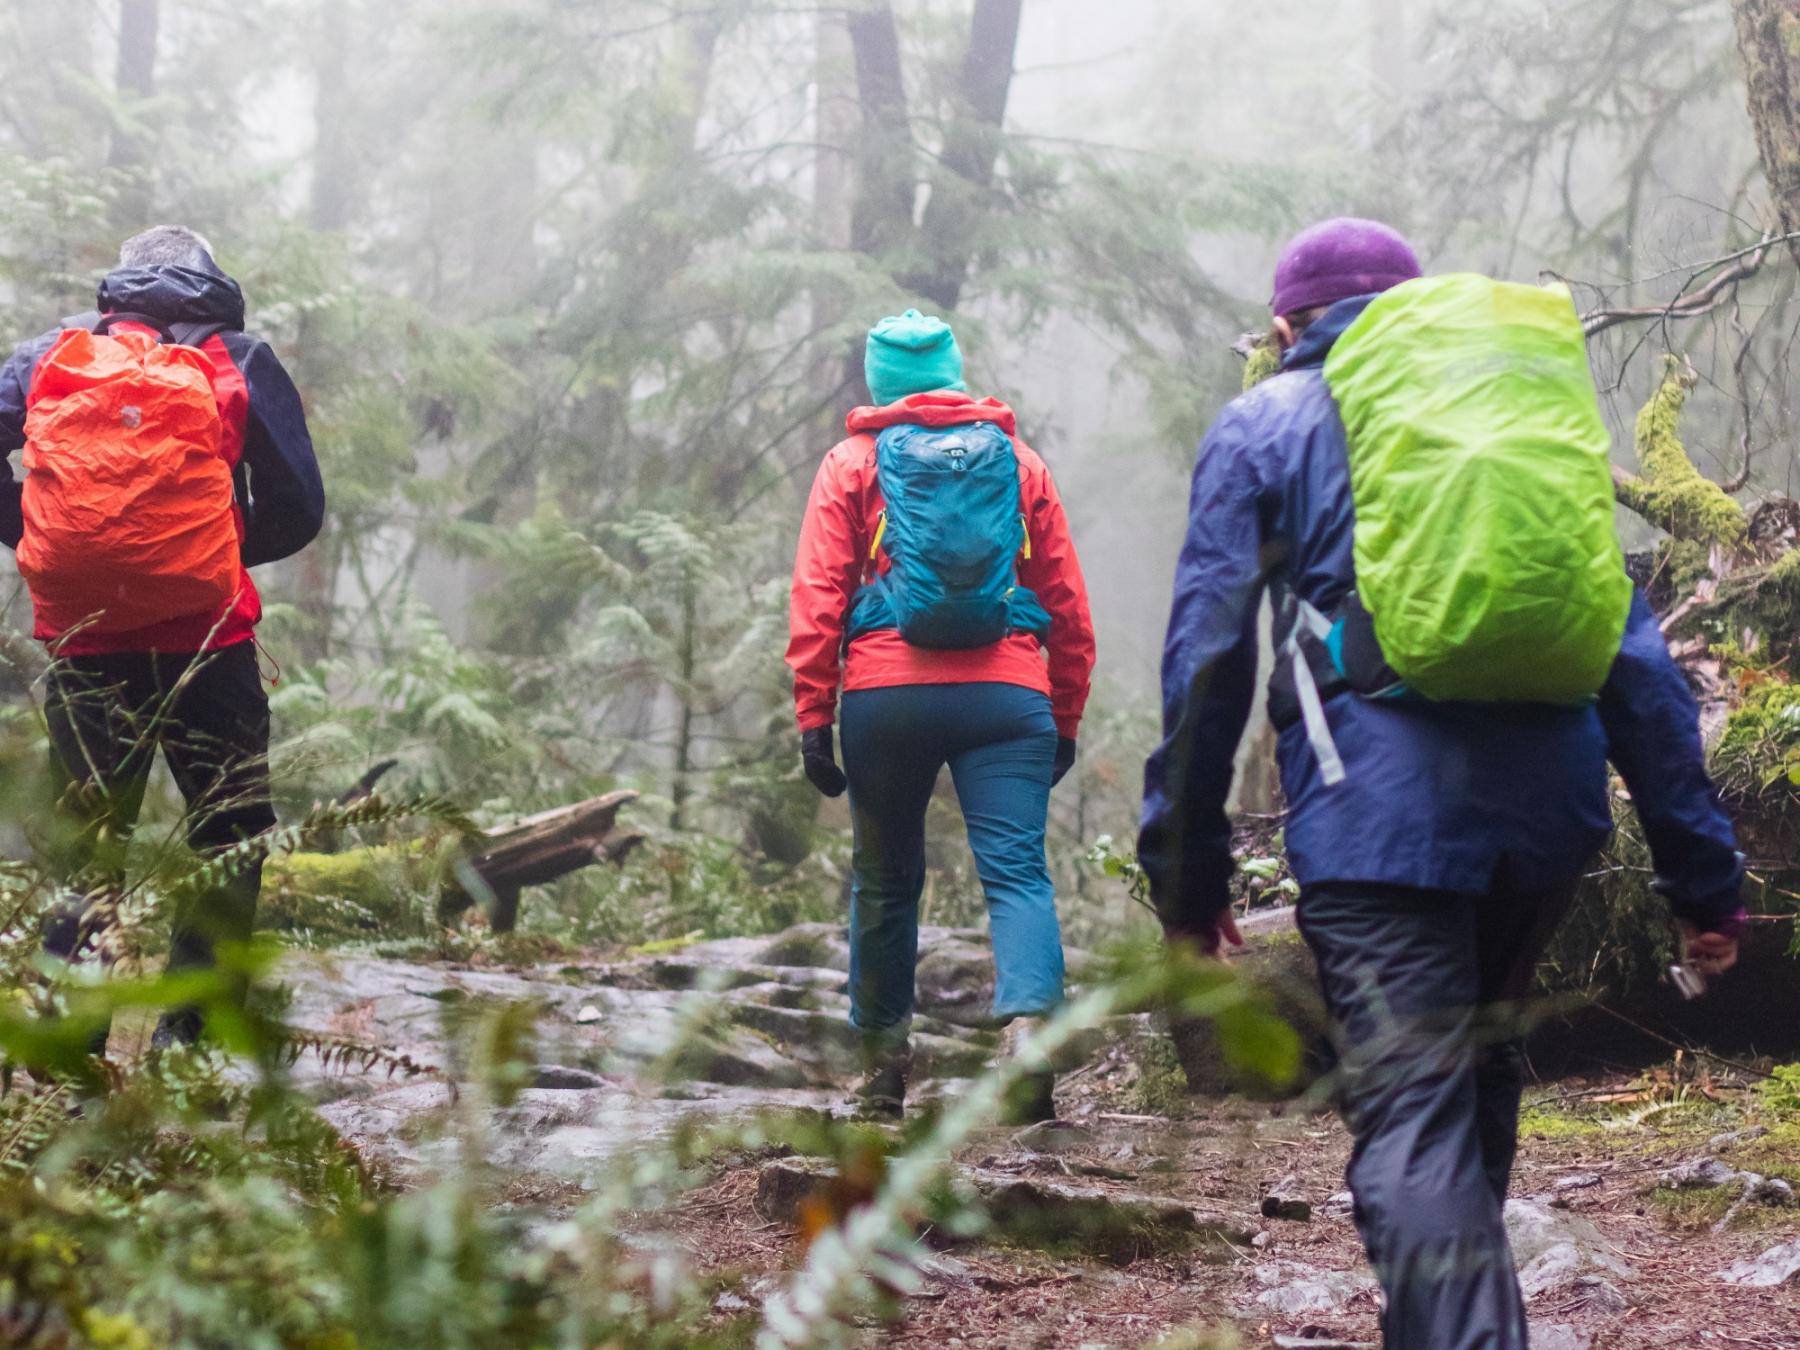 How To Enjoy Hiking In The Rain If You Never Did It Before Tips From